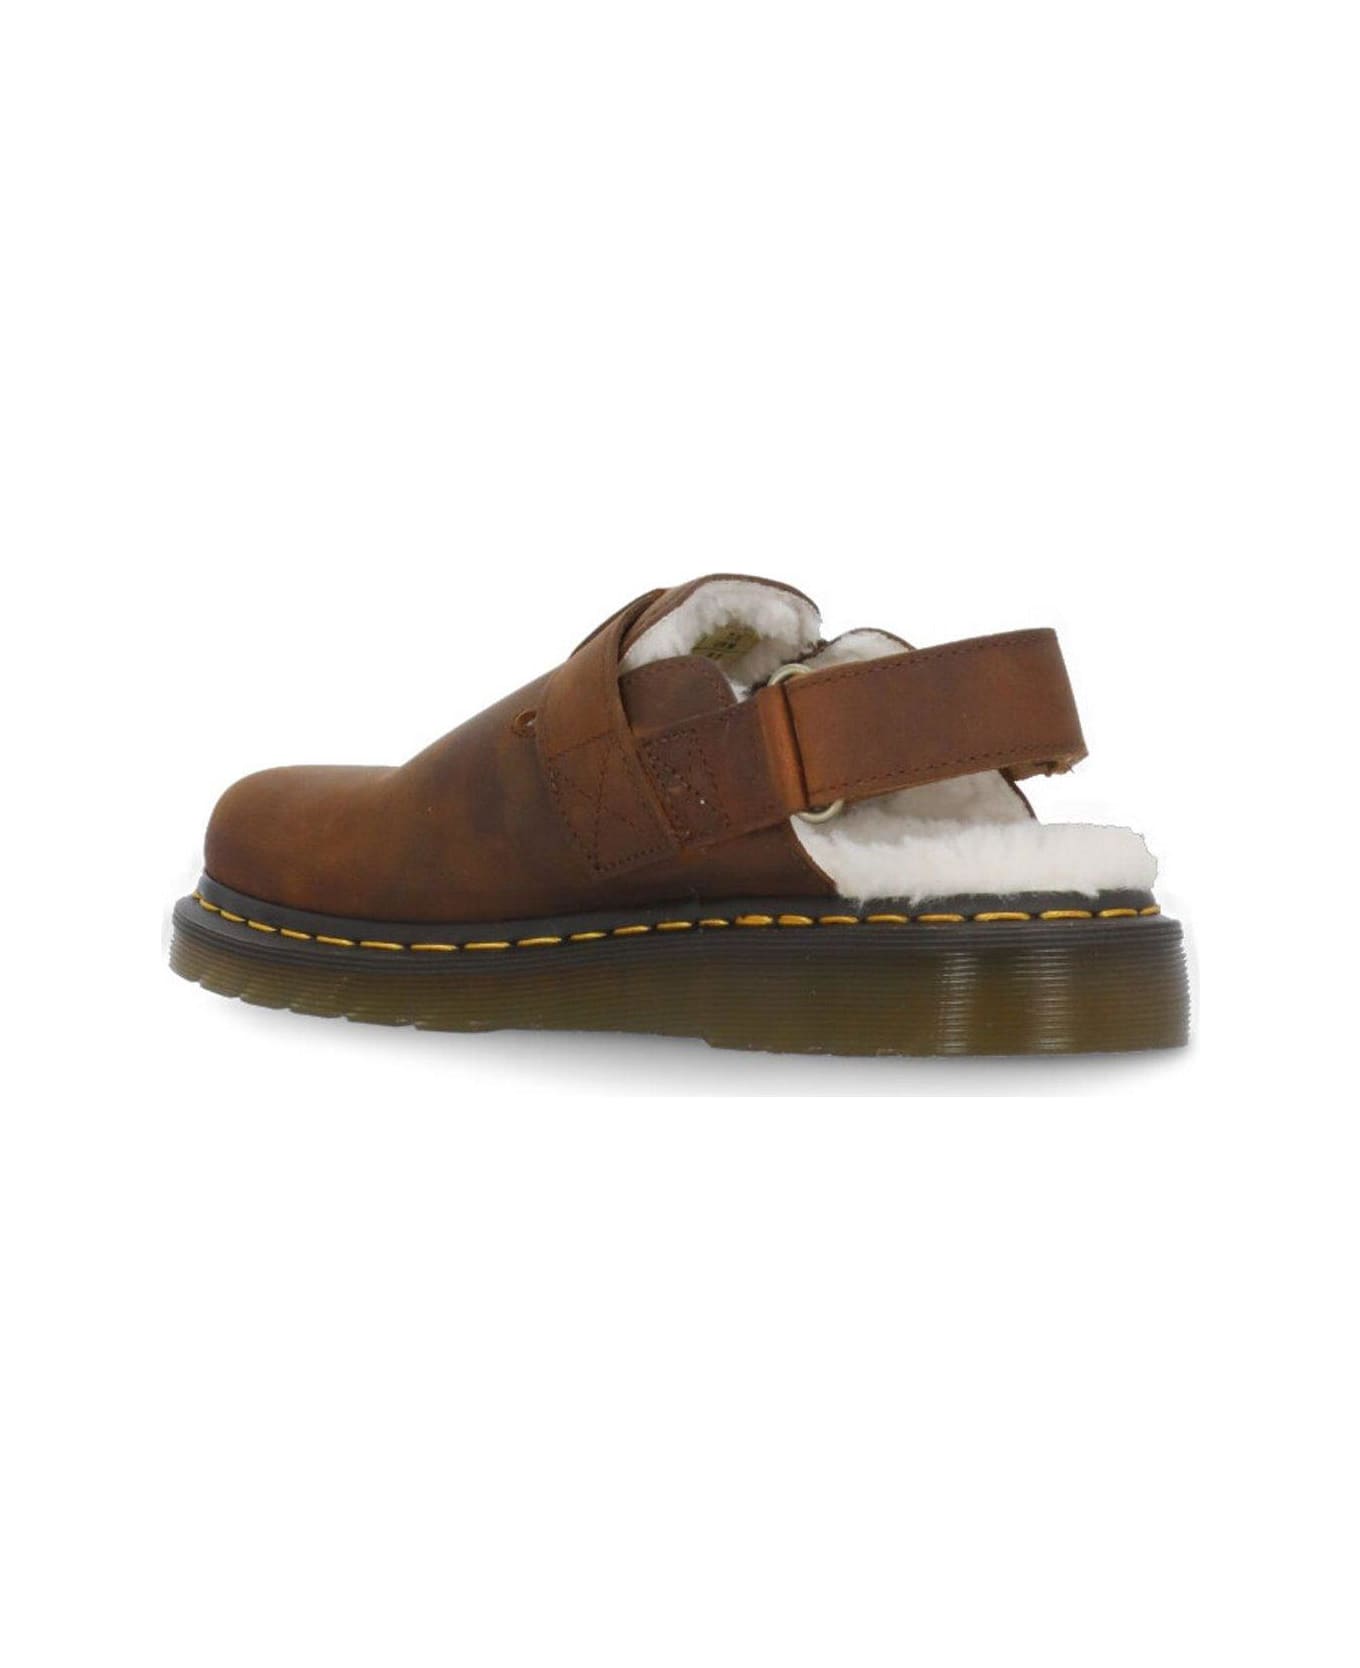 Dr. Martens Jorge Ii Mules - Brown その他各種シューズ